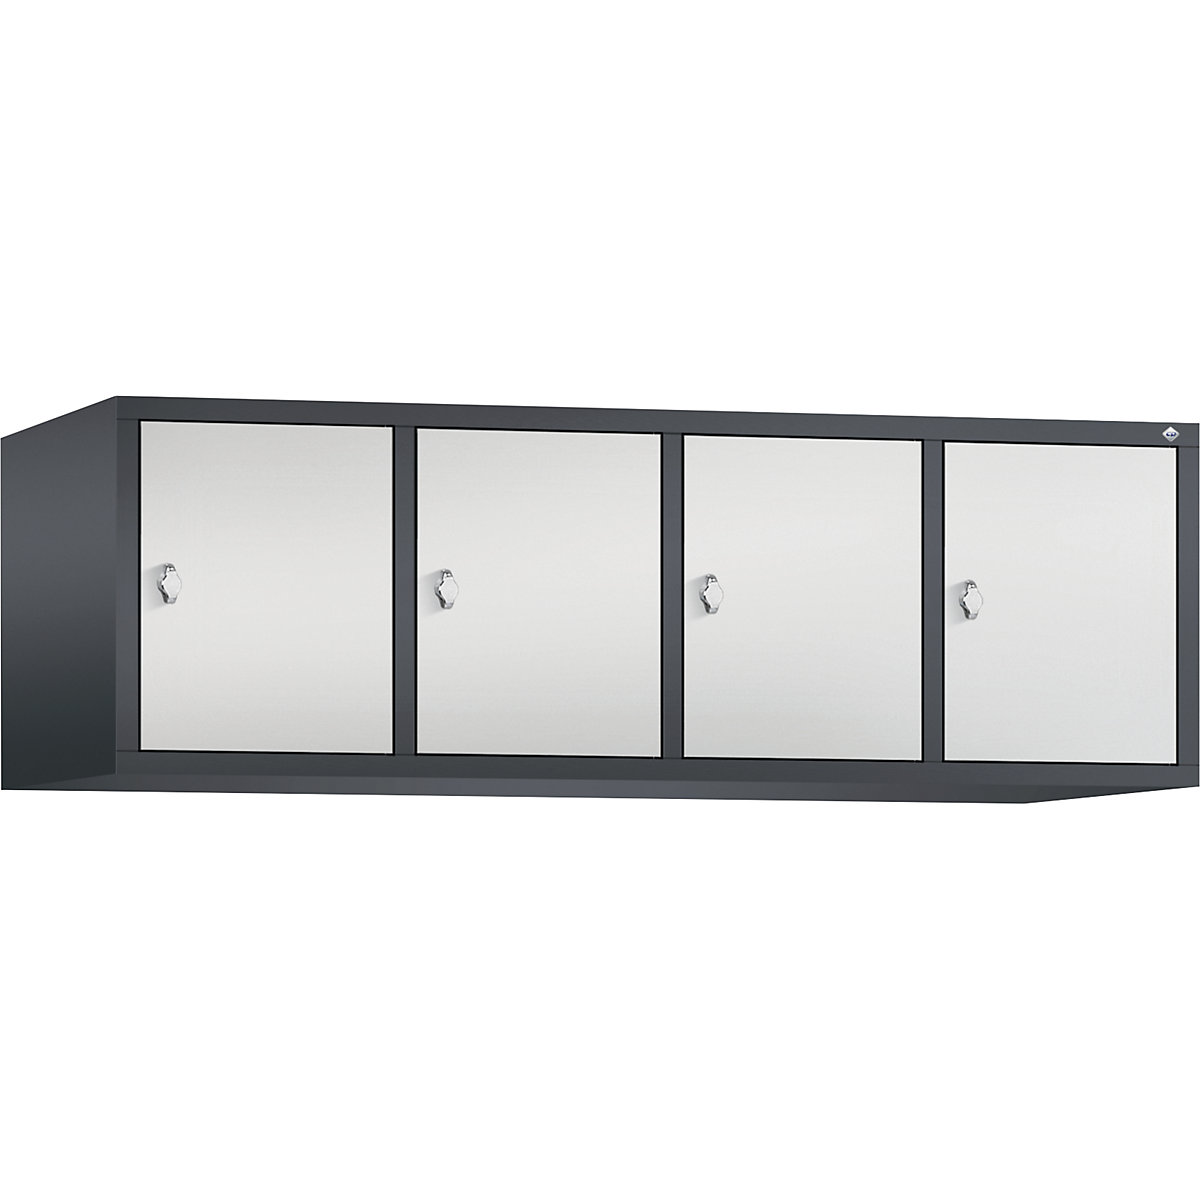 CLASSIC add-on cupboard – C+P, 4 compartments, compartment width 400 mm, black grey / light grey-4